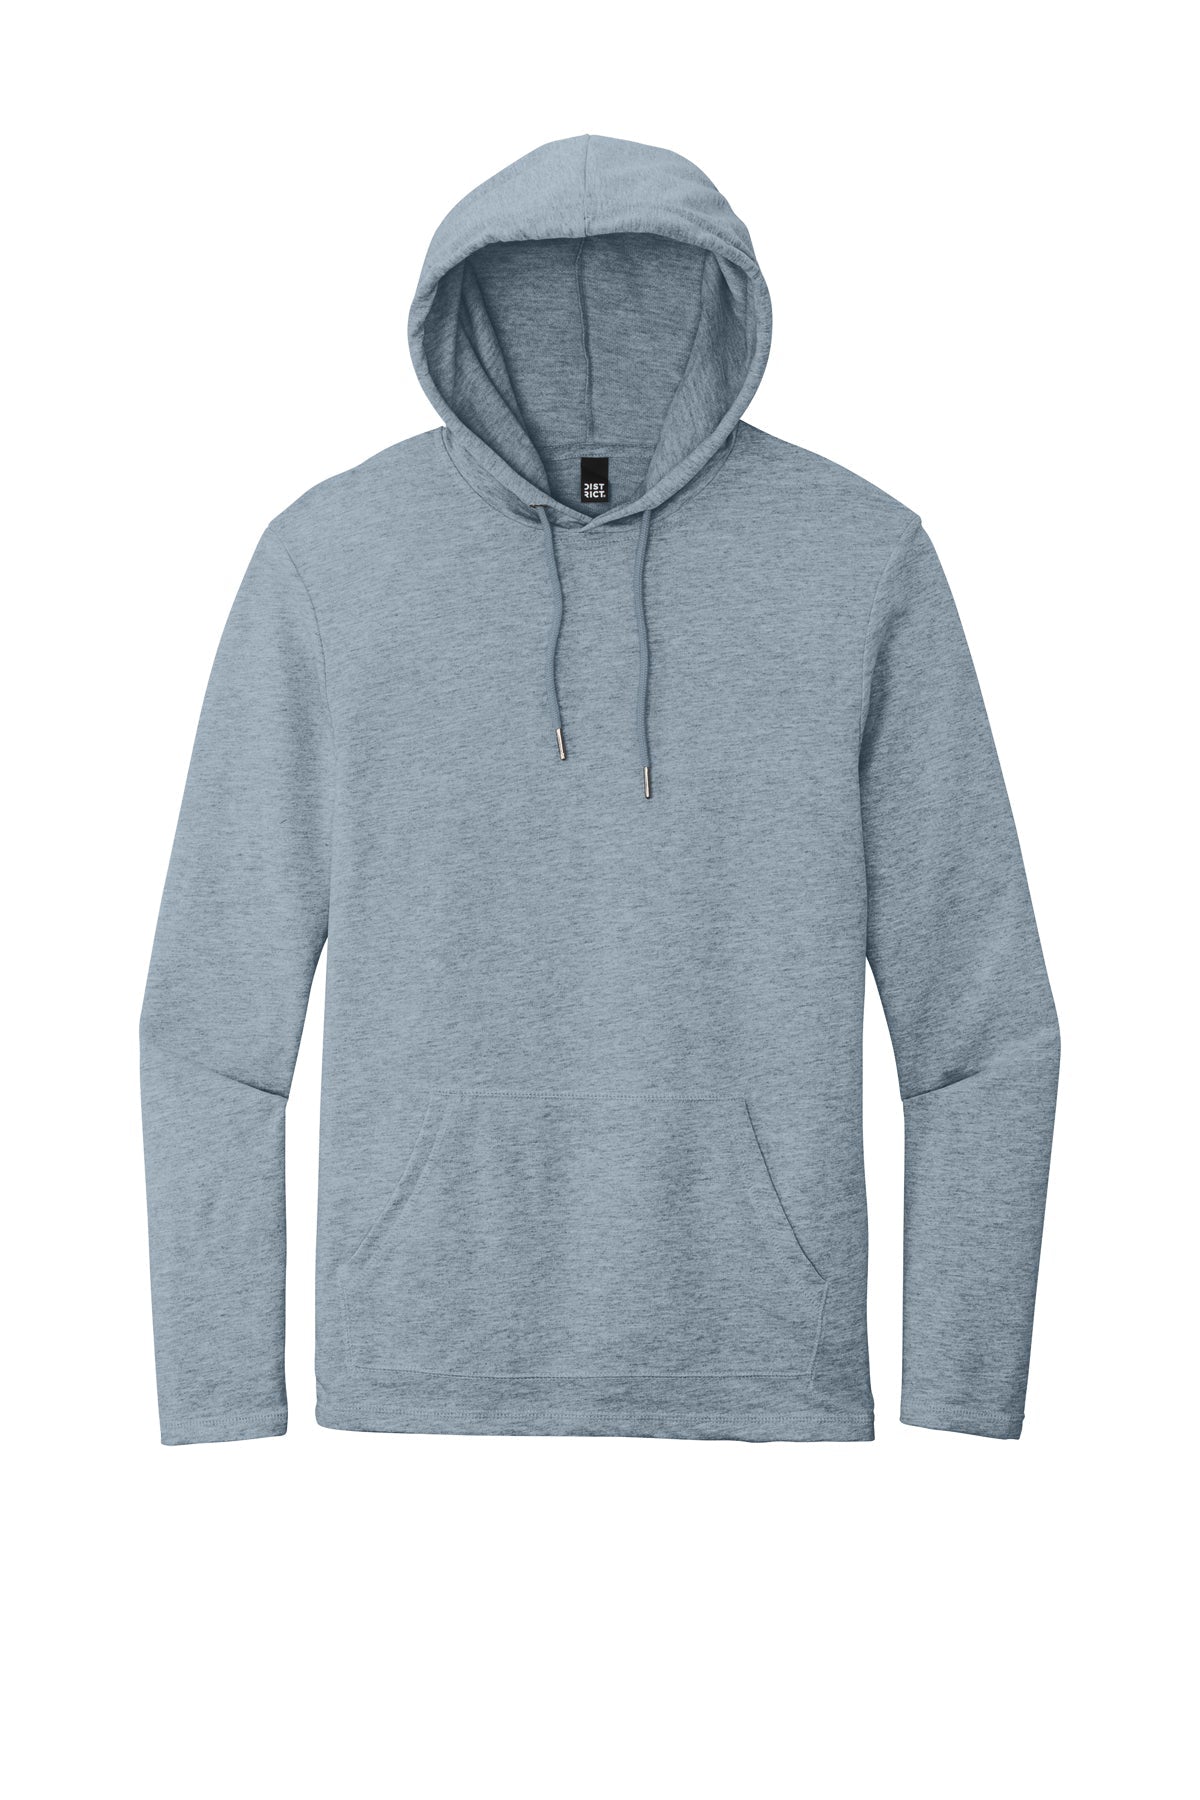 LIGHTWEIGHT - District ® Featherweight French Terry ™ Hoodie - DT571